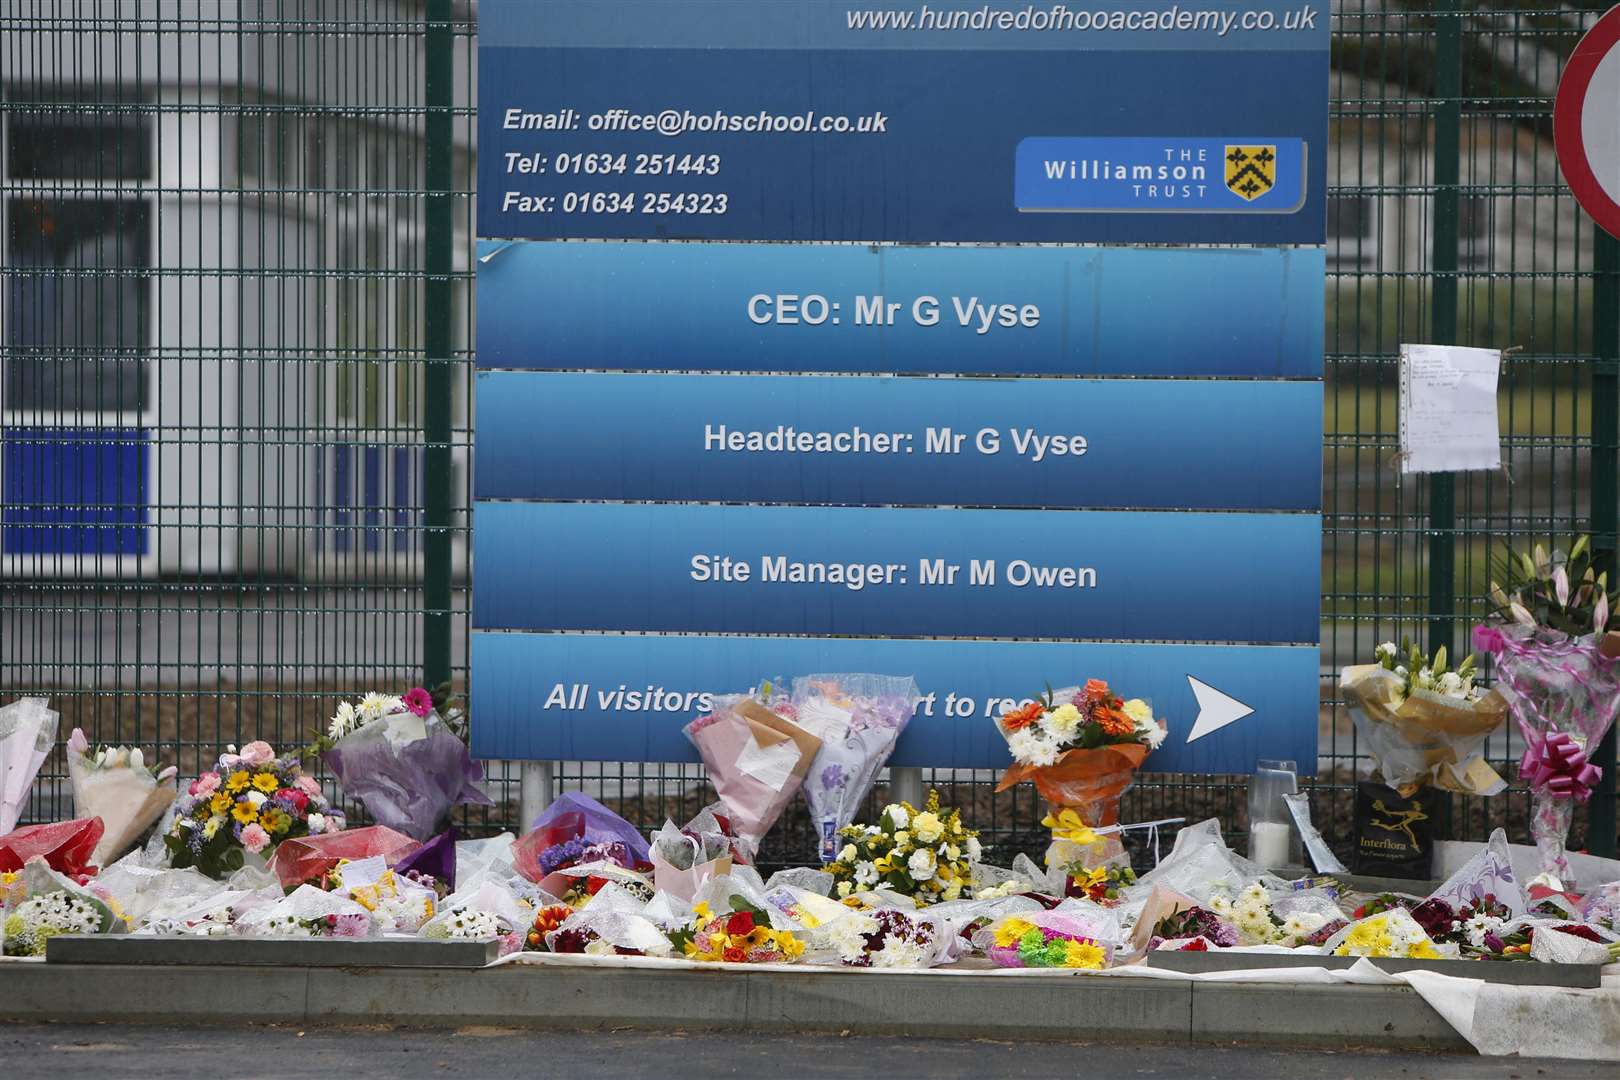 Floral tributes left at Hundred of Hoo Academy following the death of Gary Vyse